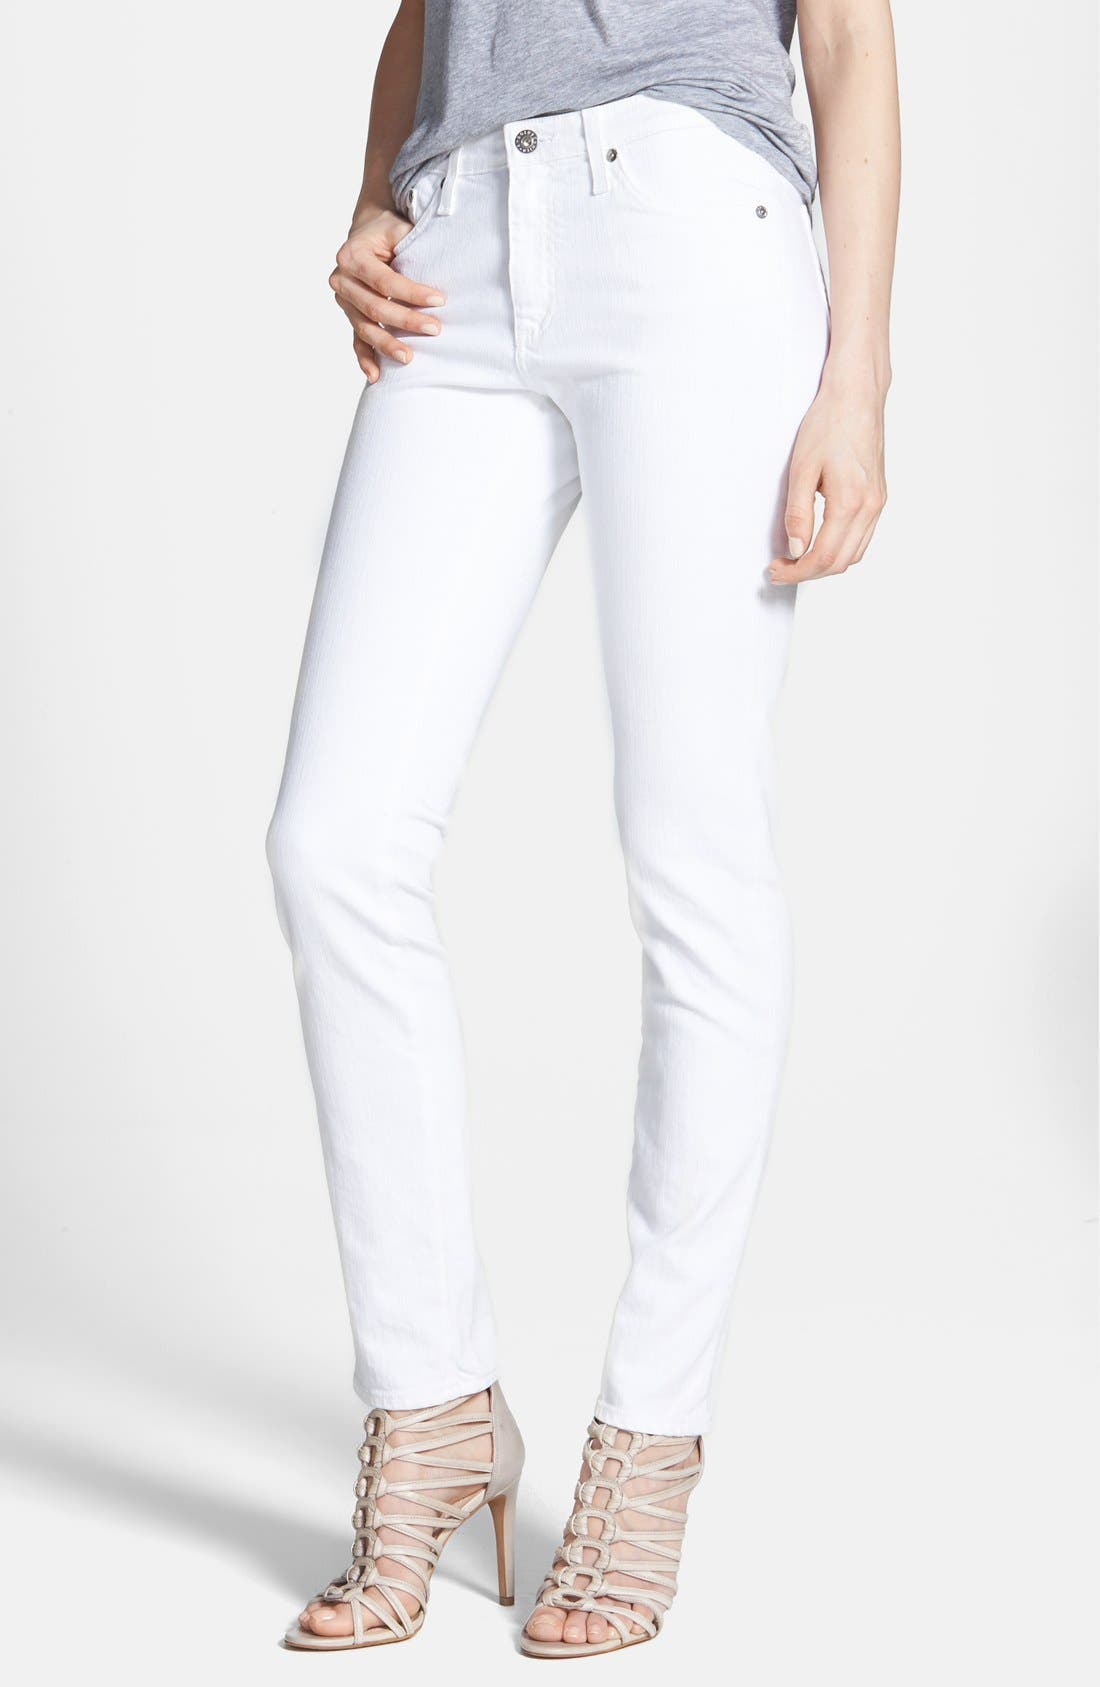 adriano goldschmied white jeans